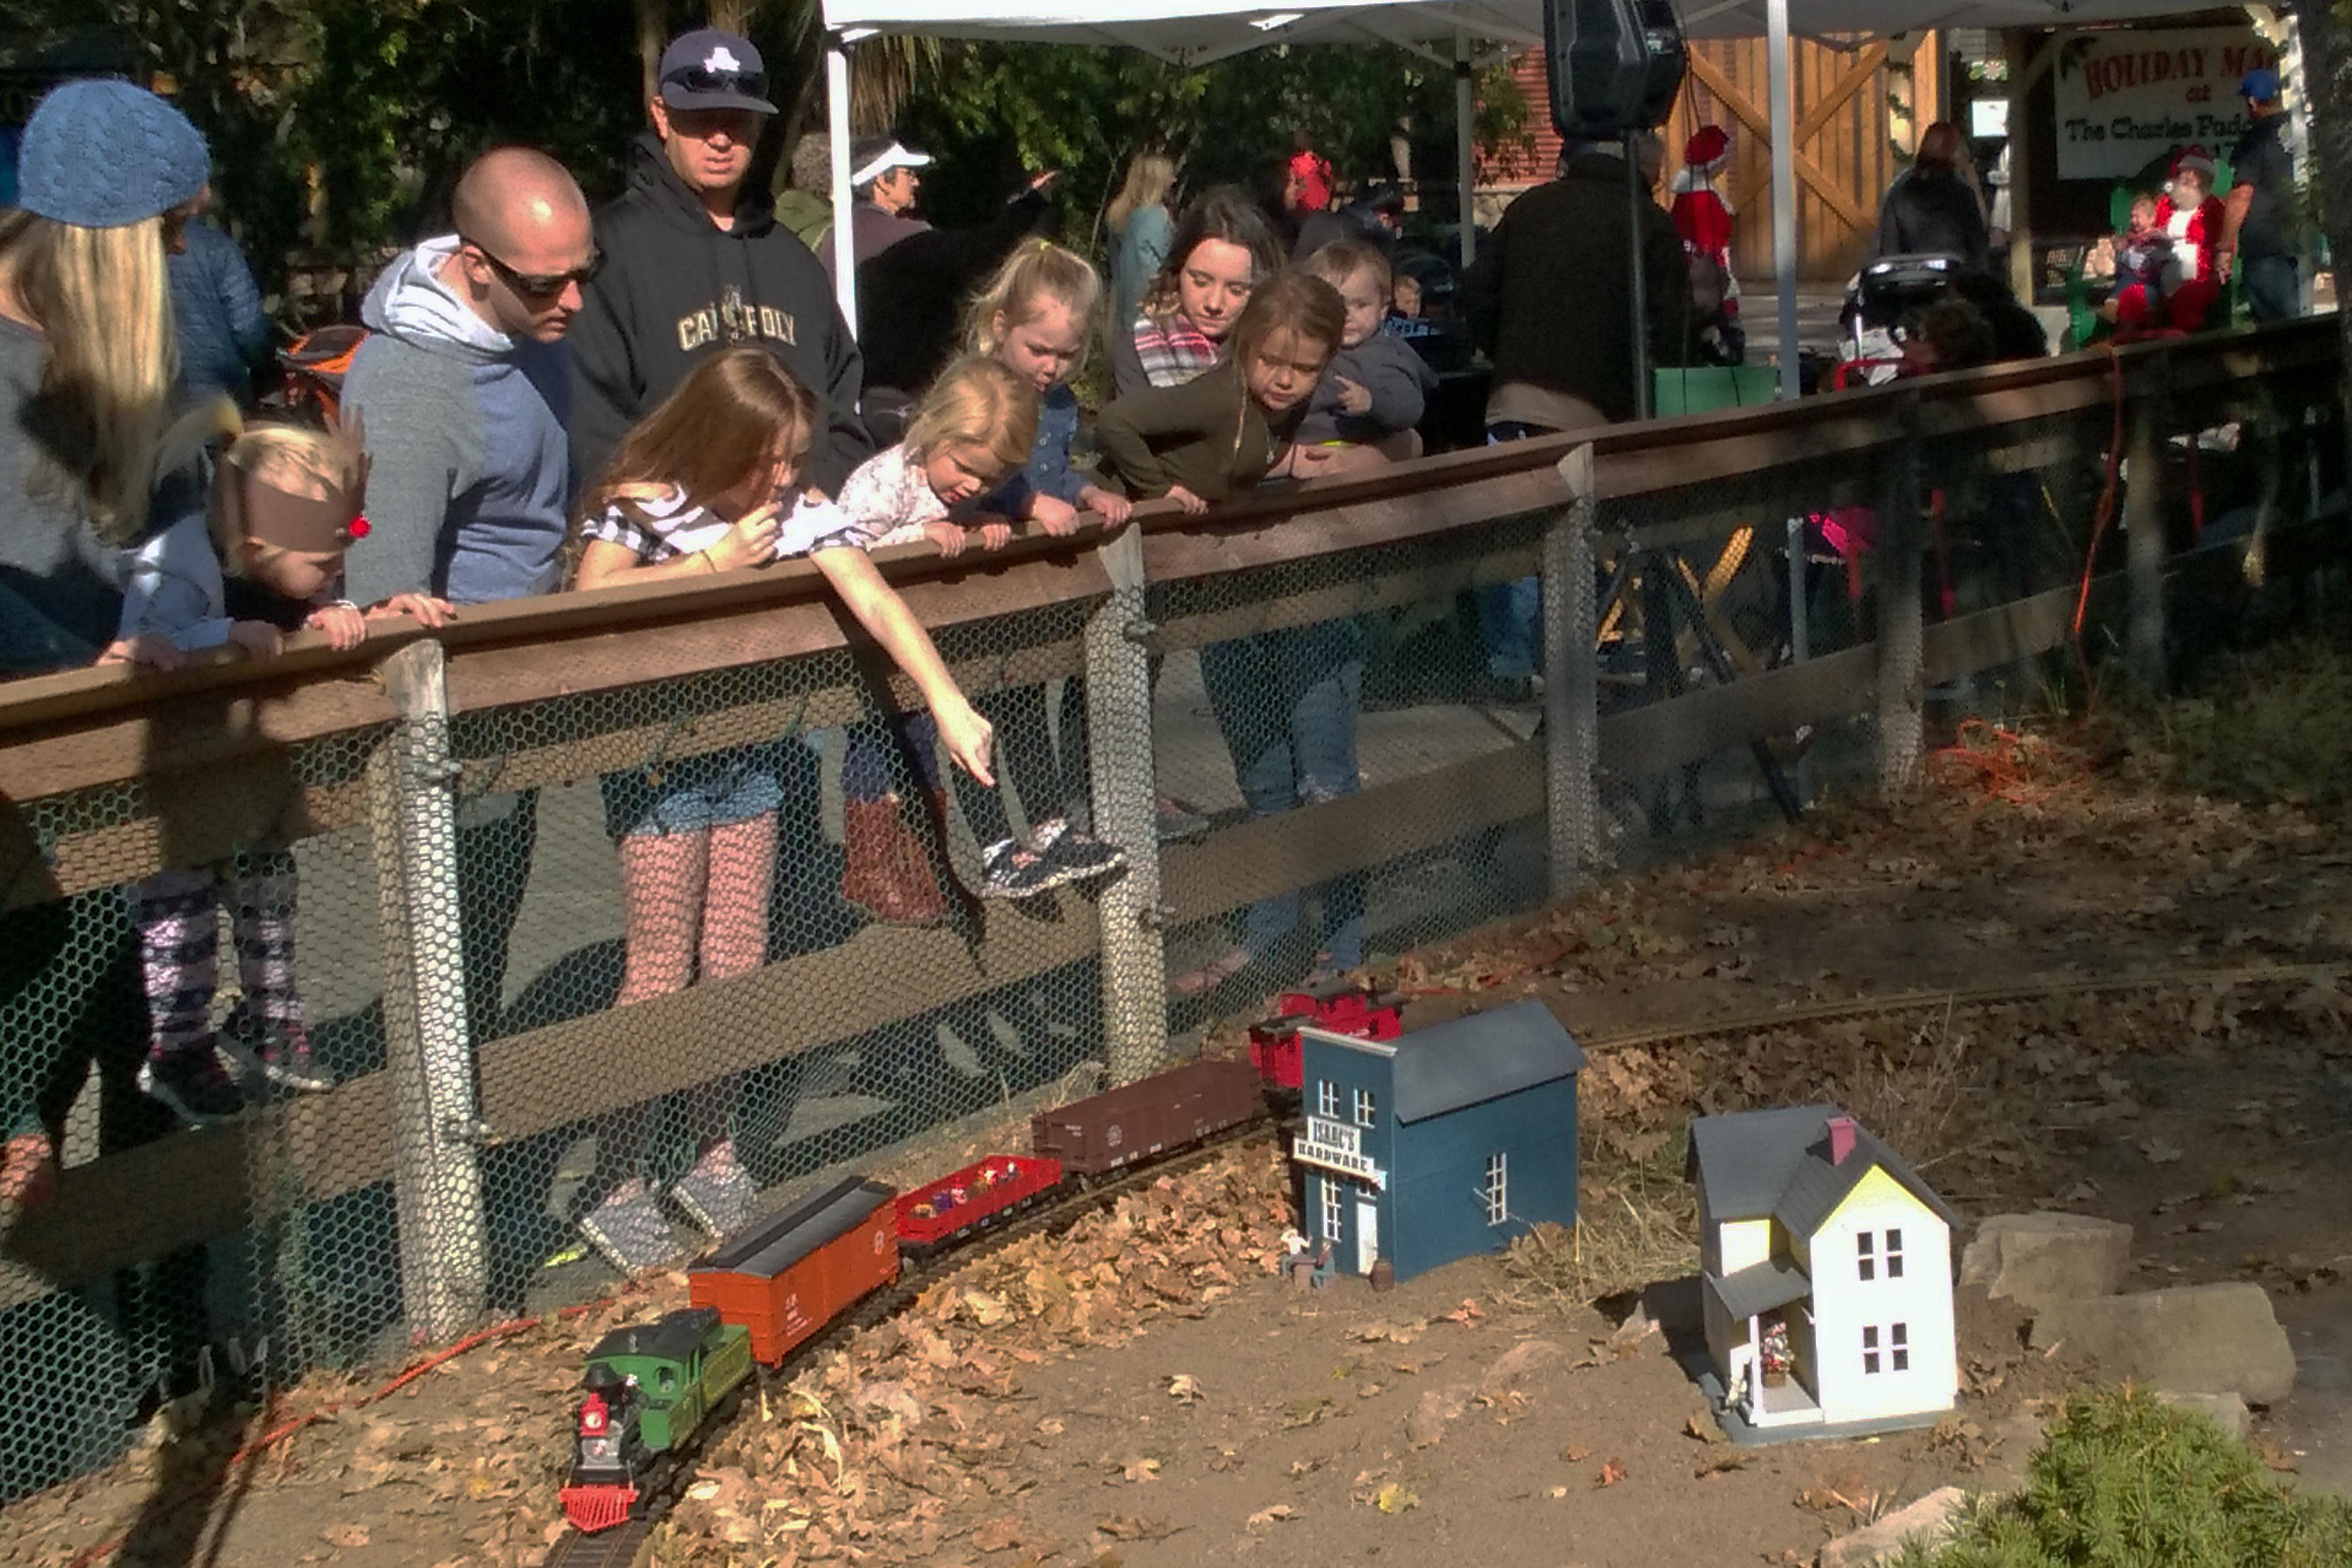 Zoo visitors watch large scale model trains